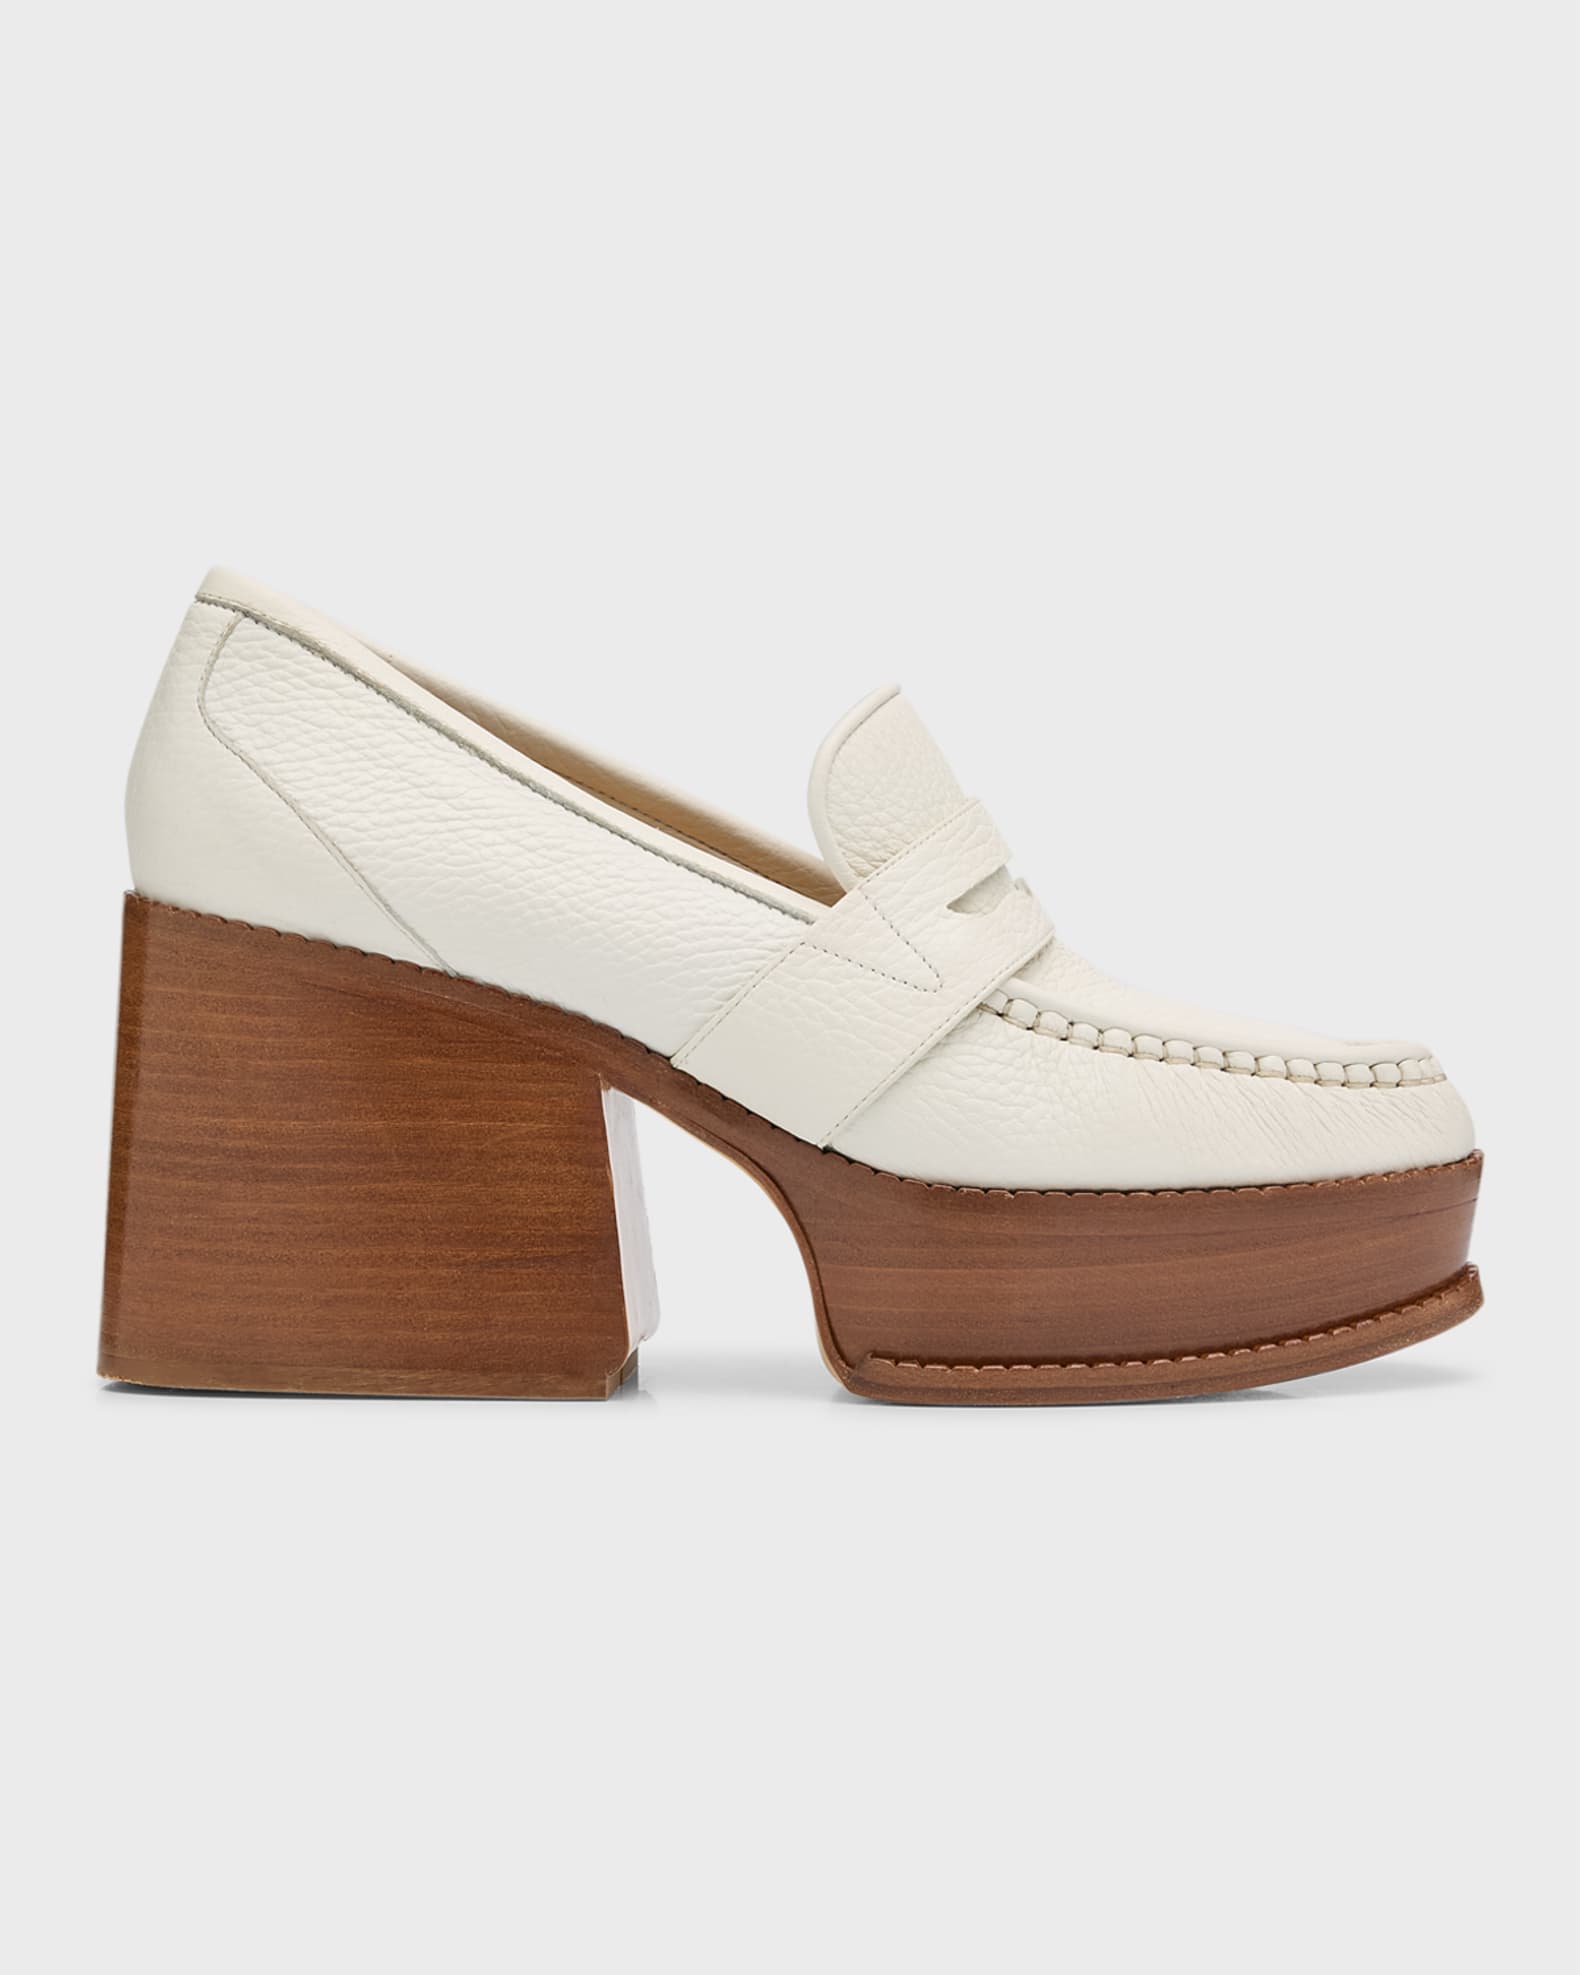 Gabriela Hearst Augusta Leather Heeled Penny Loafers | Neiman Marcus